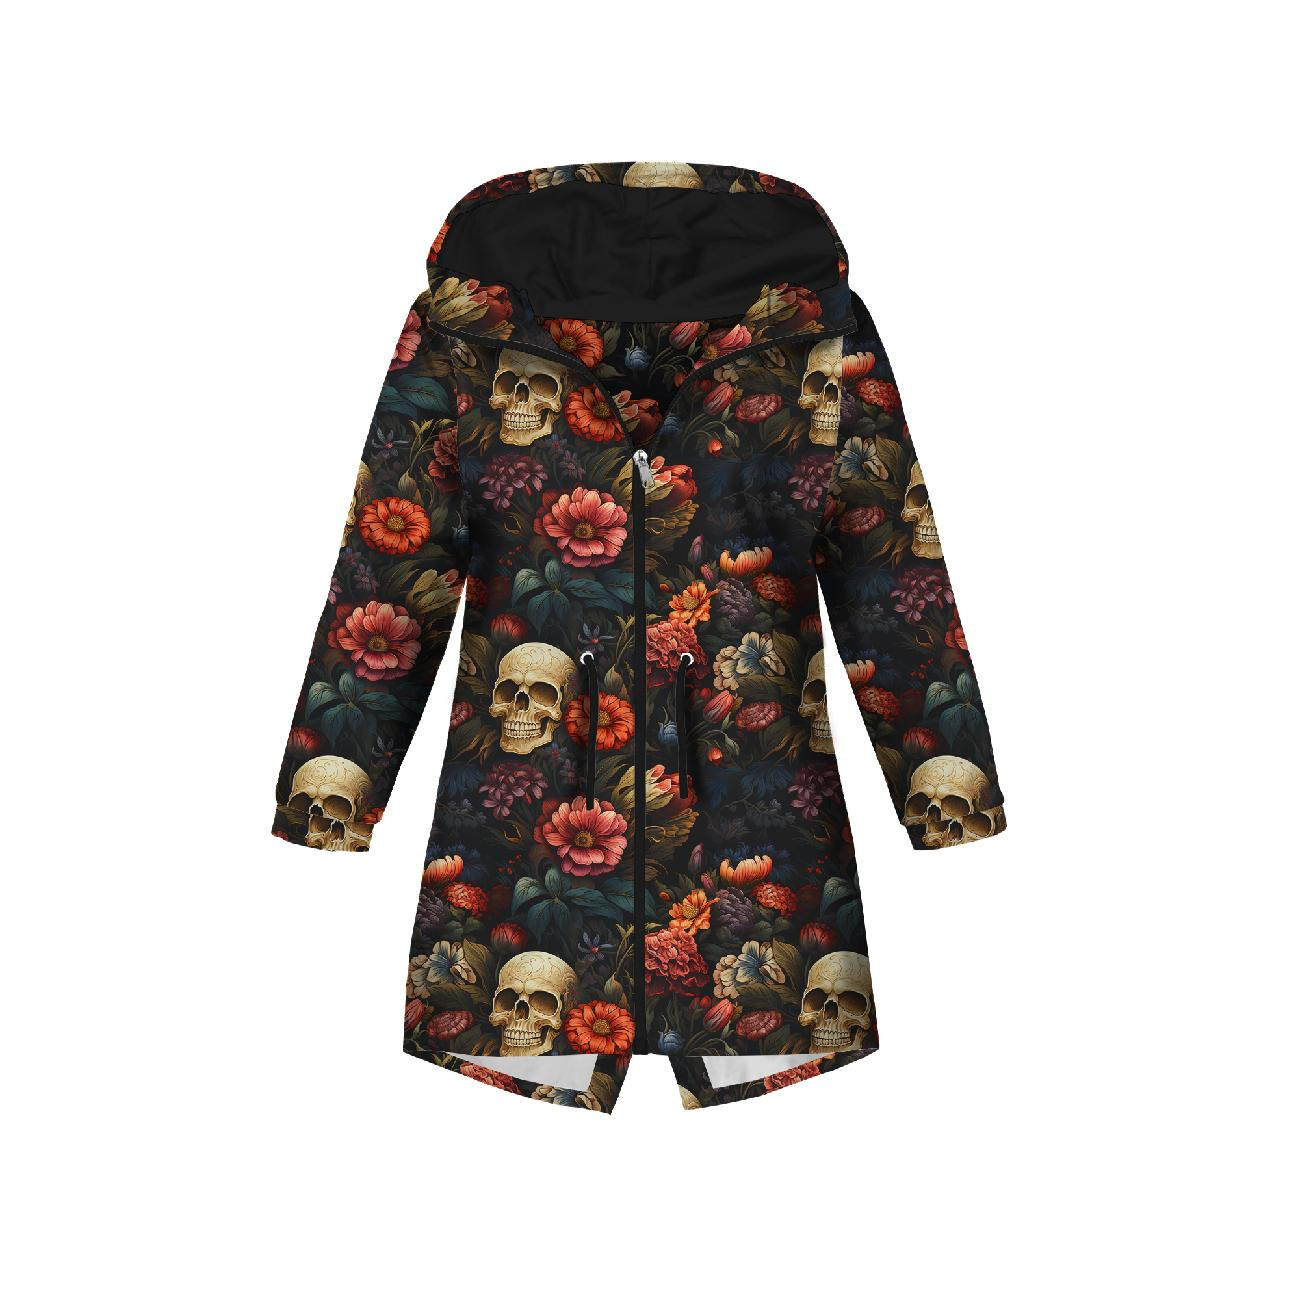 KIDS PARKA (ARIEL) - FLOWERS AND SKULL - sewing set